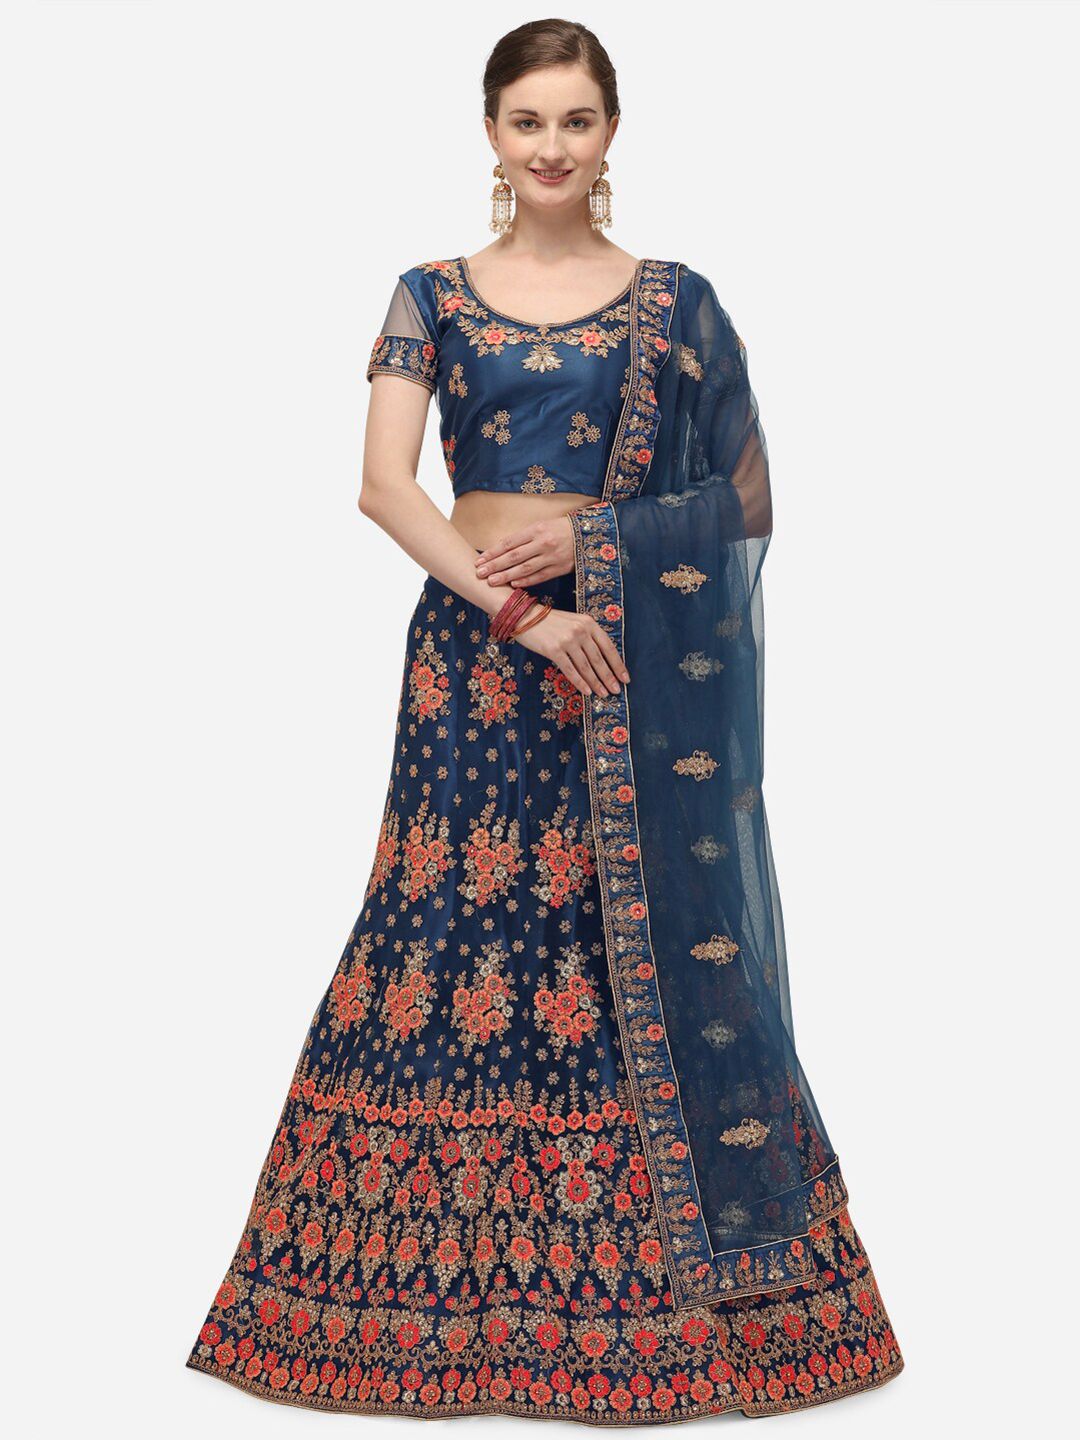 Netram Blue & Orange Embroidered Semi-Stitched Lehenga & Unstitched Blouse With Dupatta Price in India